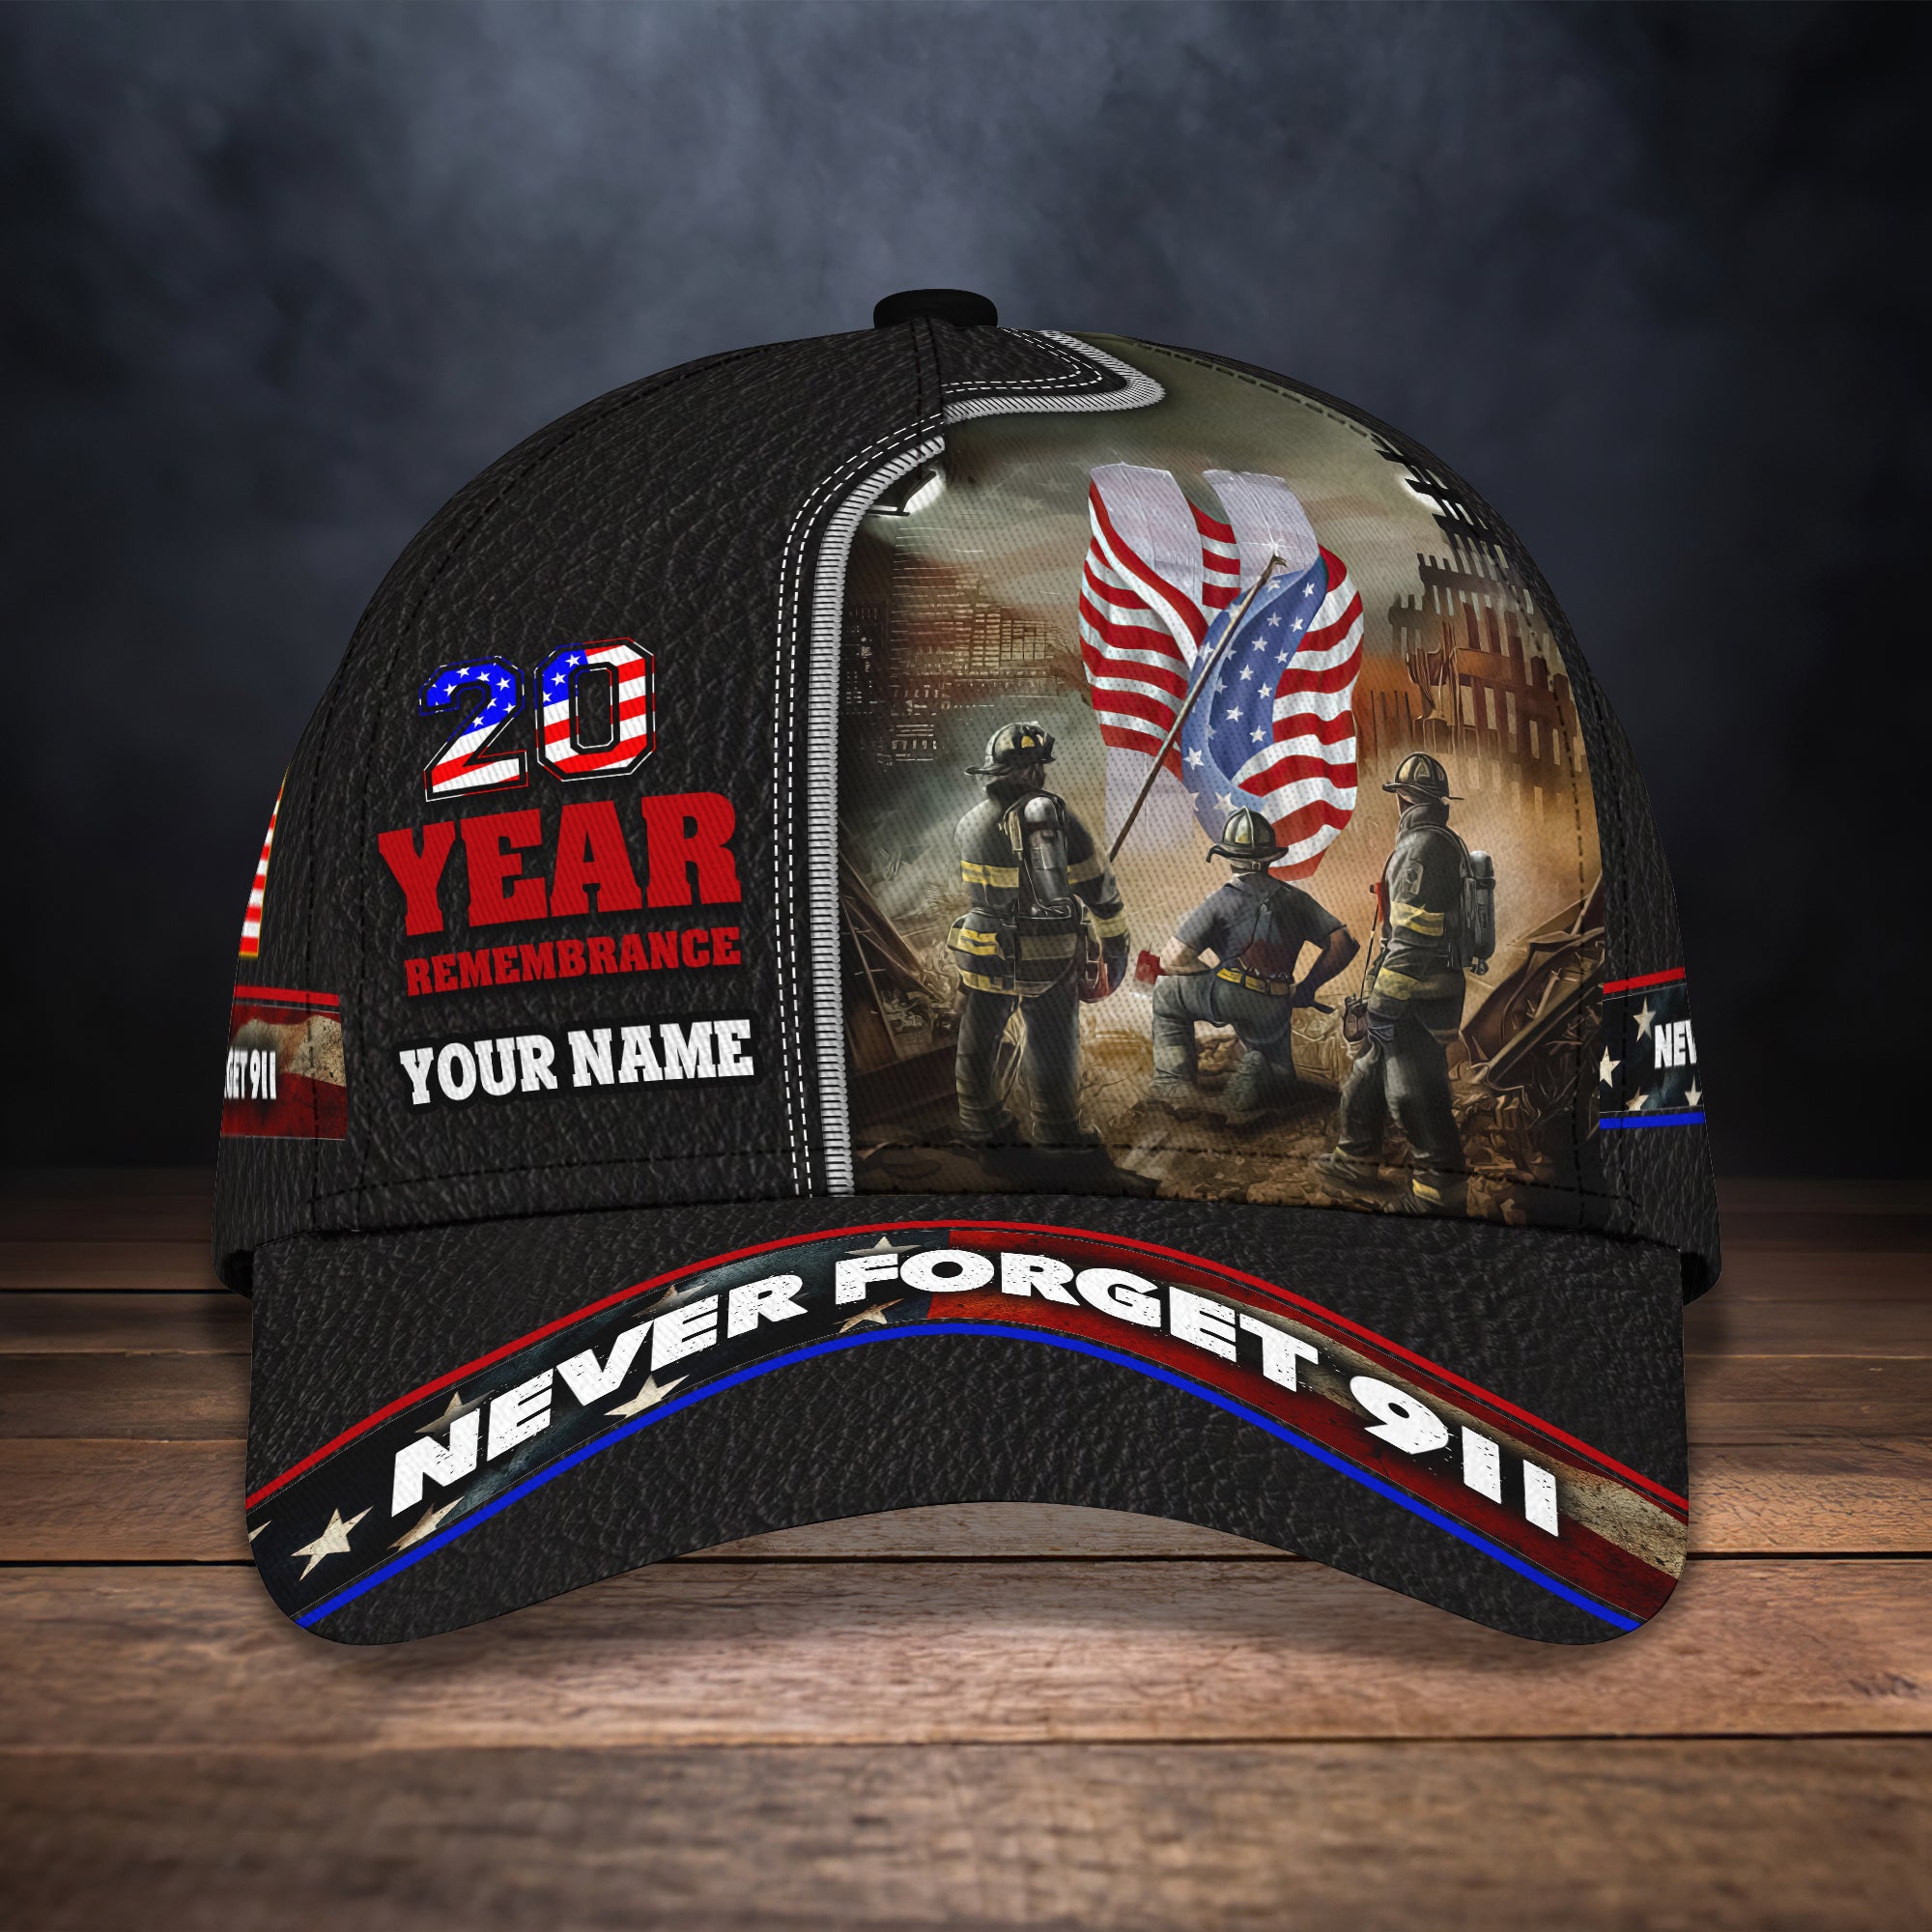 20 Year Remembrance - Personalized Name Cap- CV98